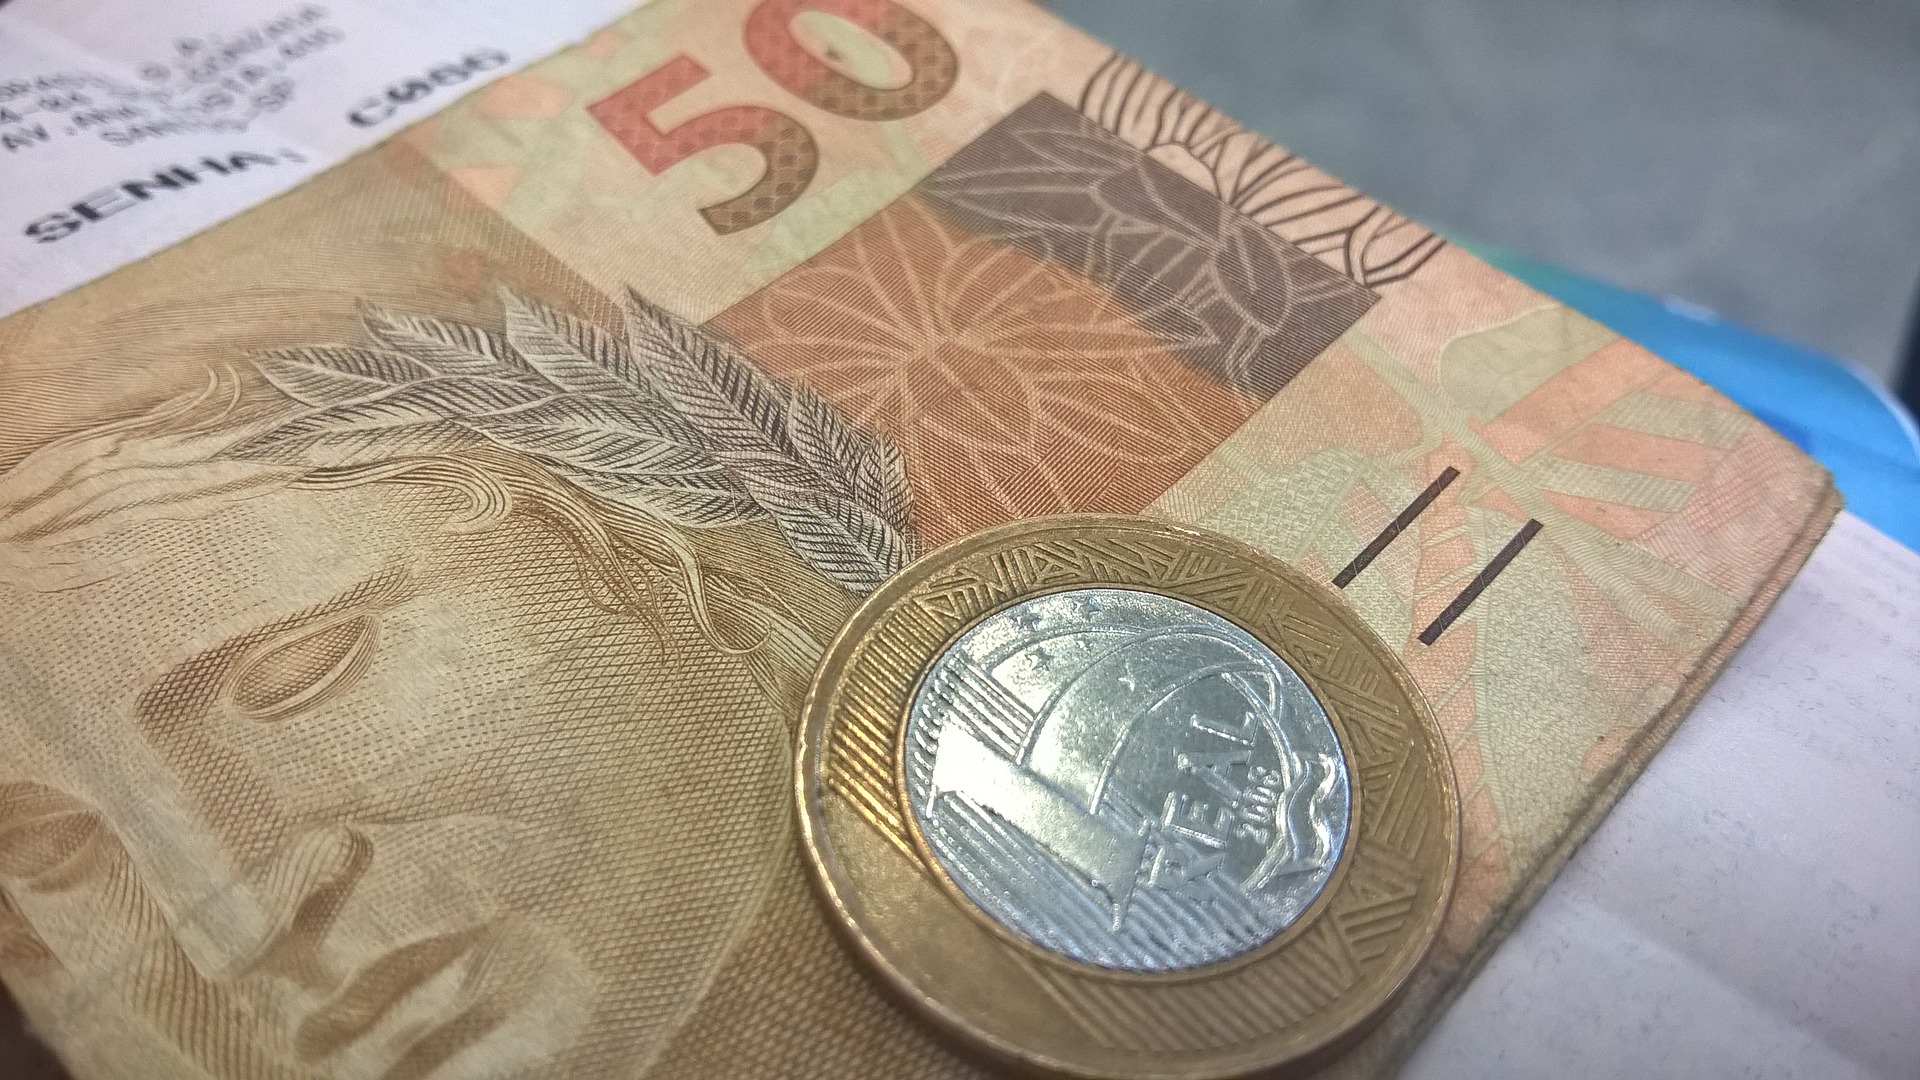 Brazilian Real 7 Facts You Need to Know about Brazil's Currency